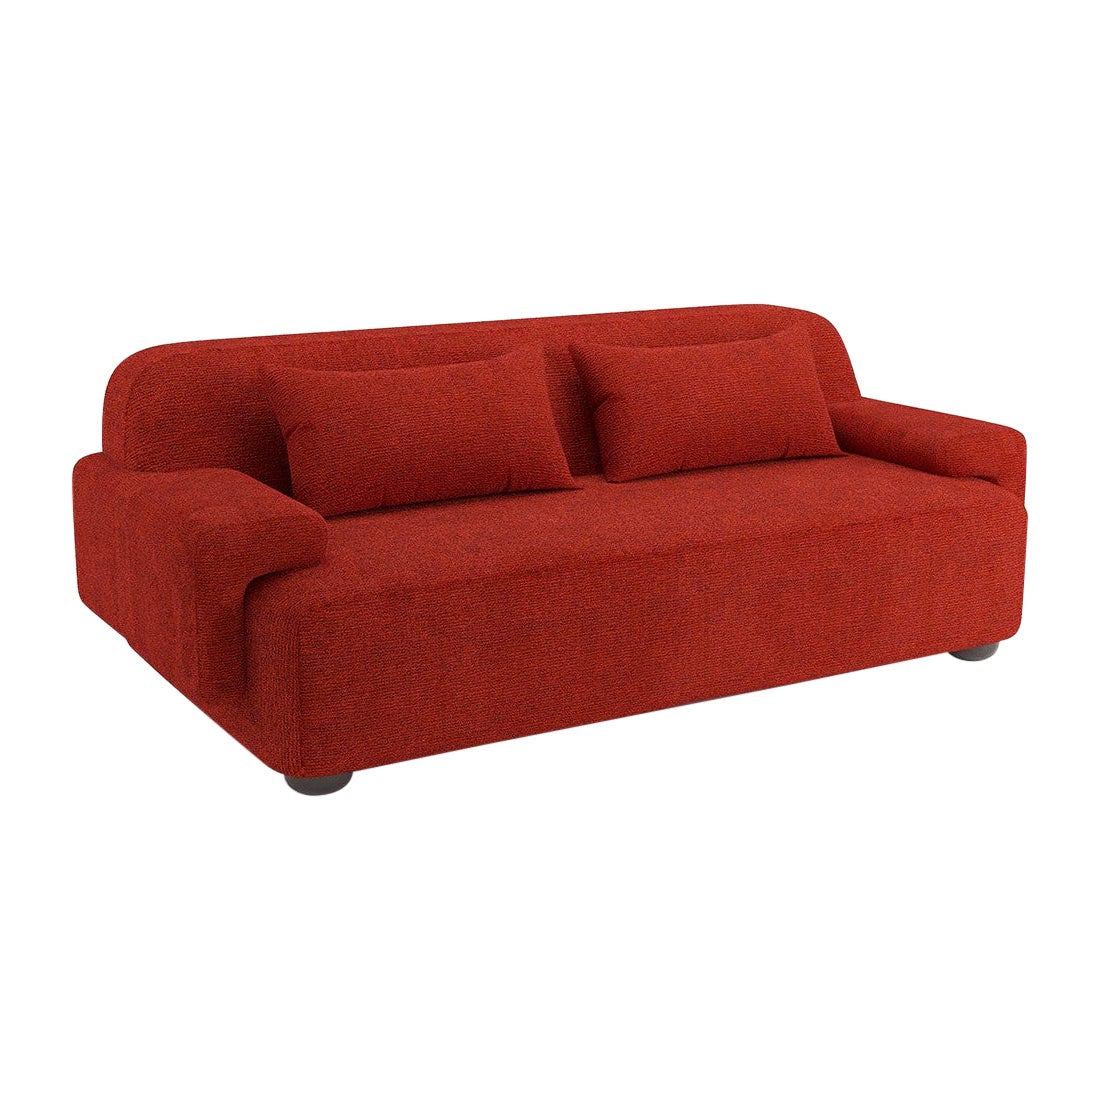 Popus Editions Lena 3 Seater Sofa in Rust Megeve Fabric with Knit Effect For Sale